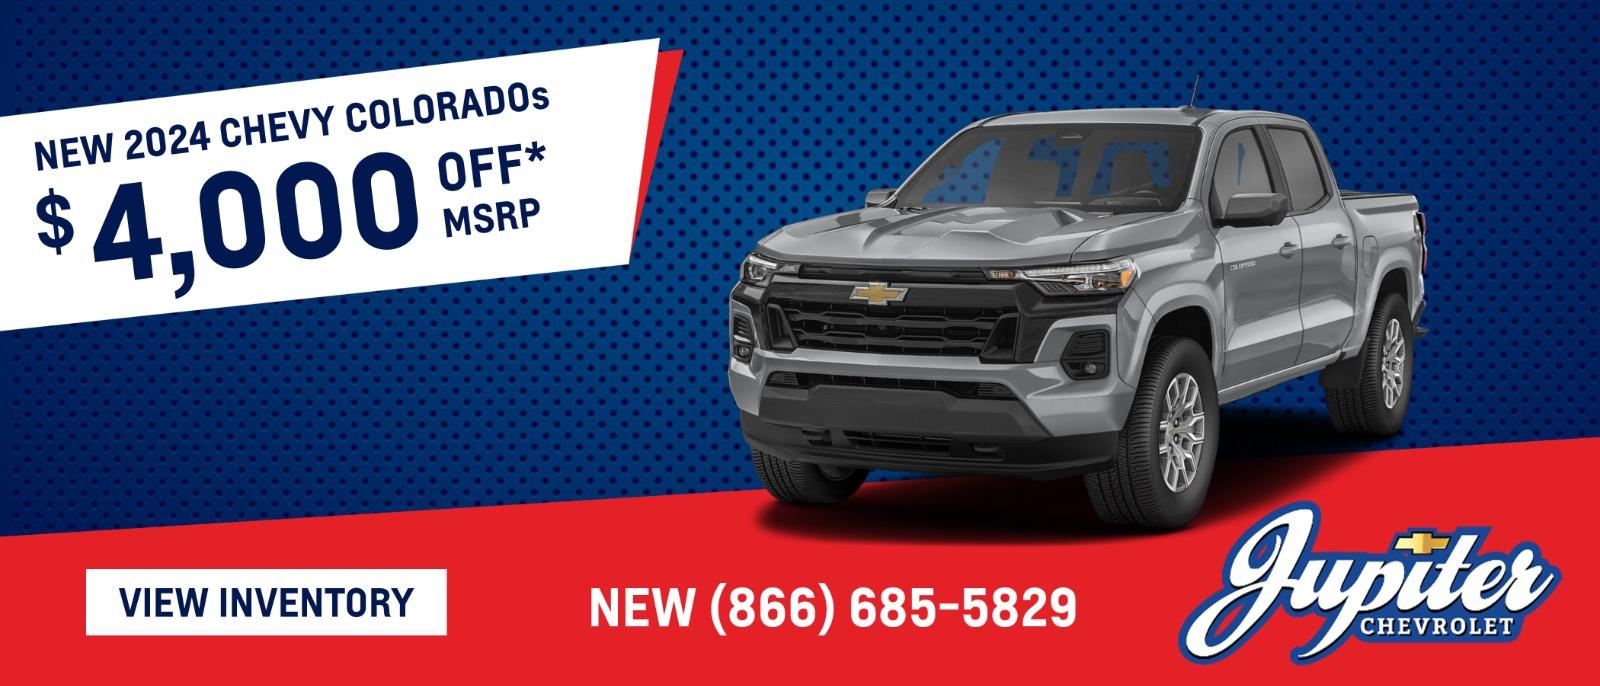 Up to $4,000 Off MSRP